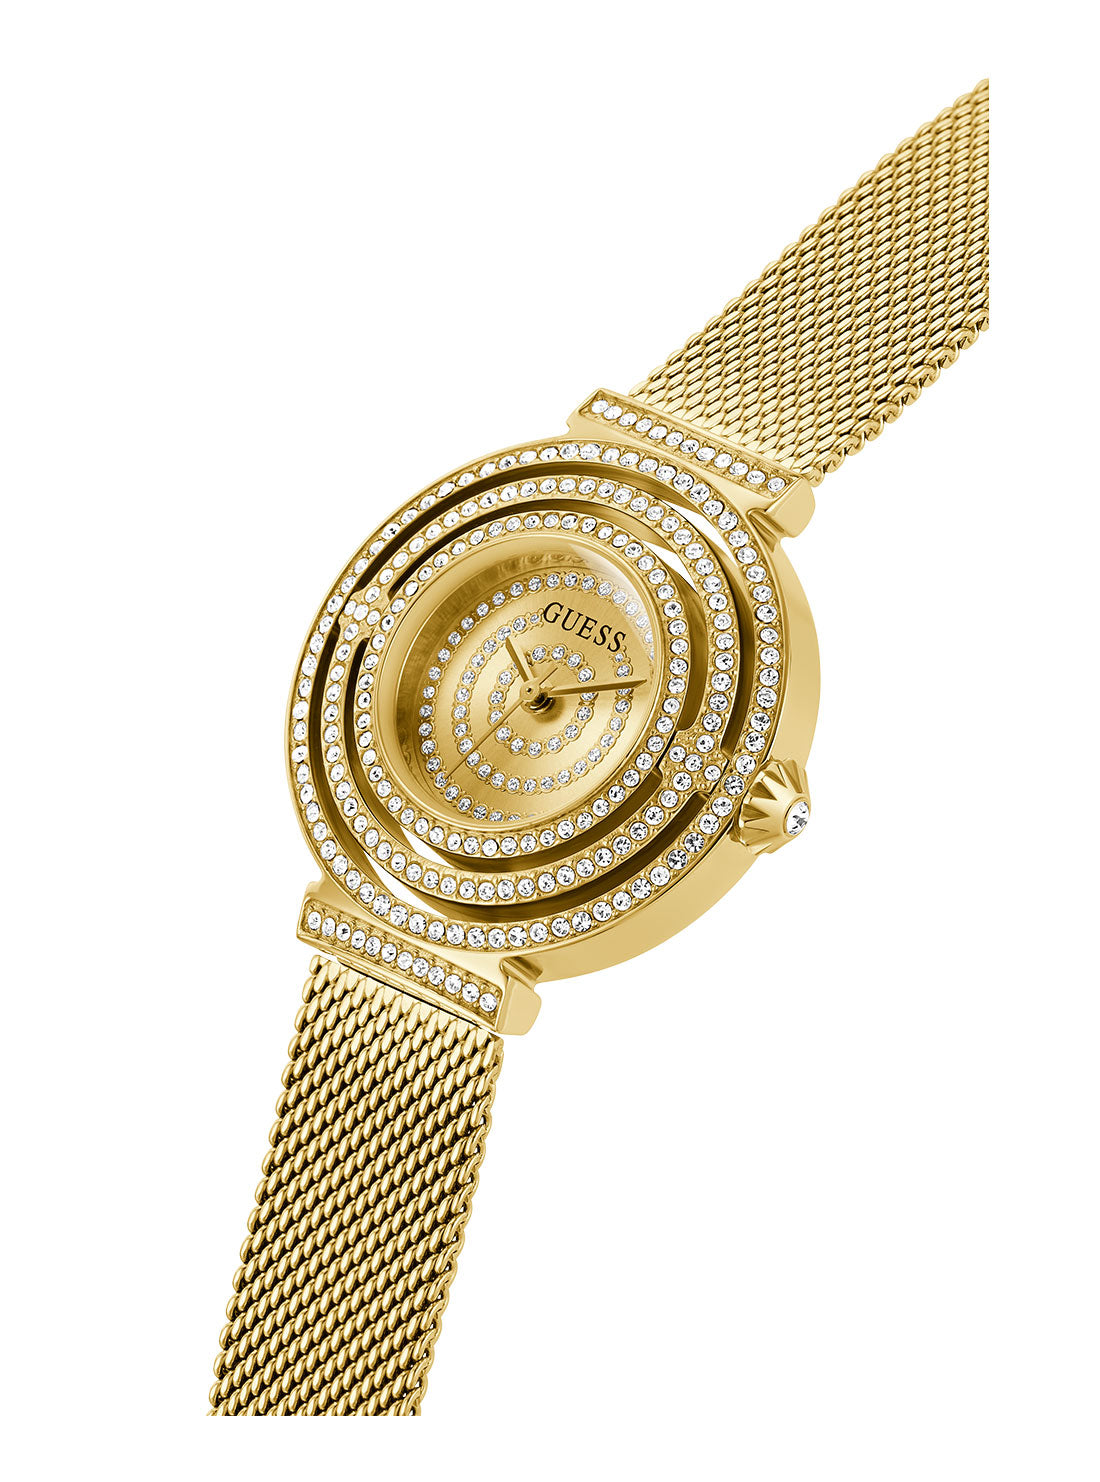 GUESS Women's Gold Dream Crystal Mesh Watch GW0550L2 Angle View